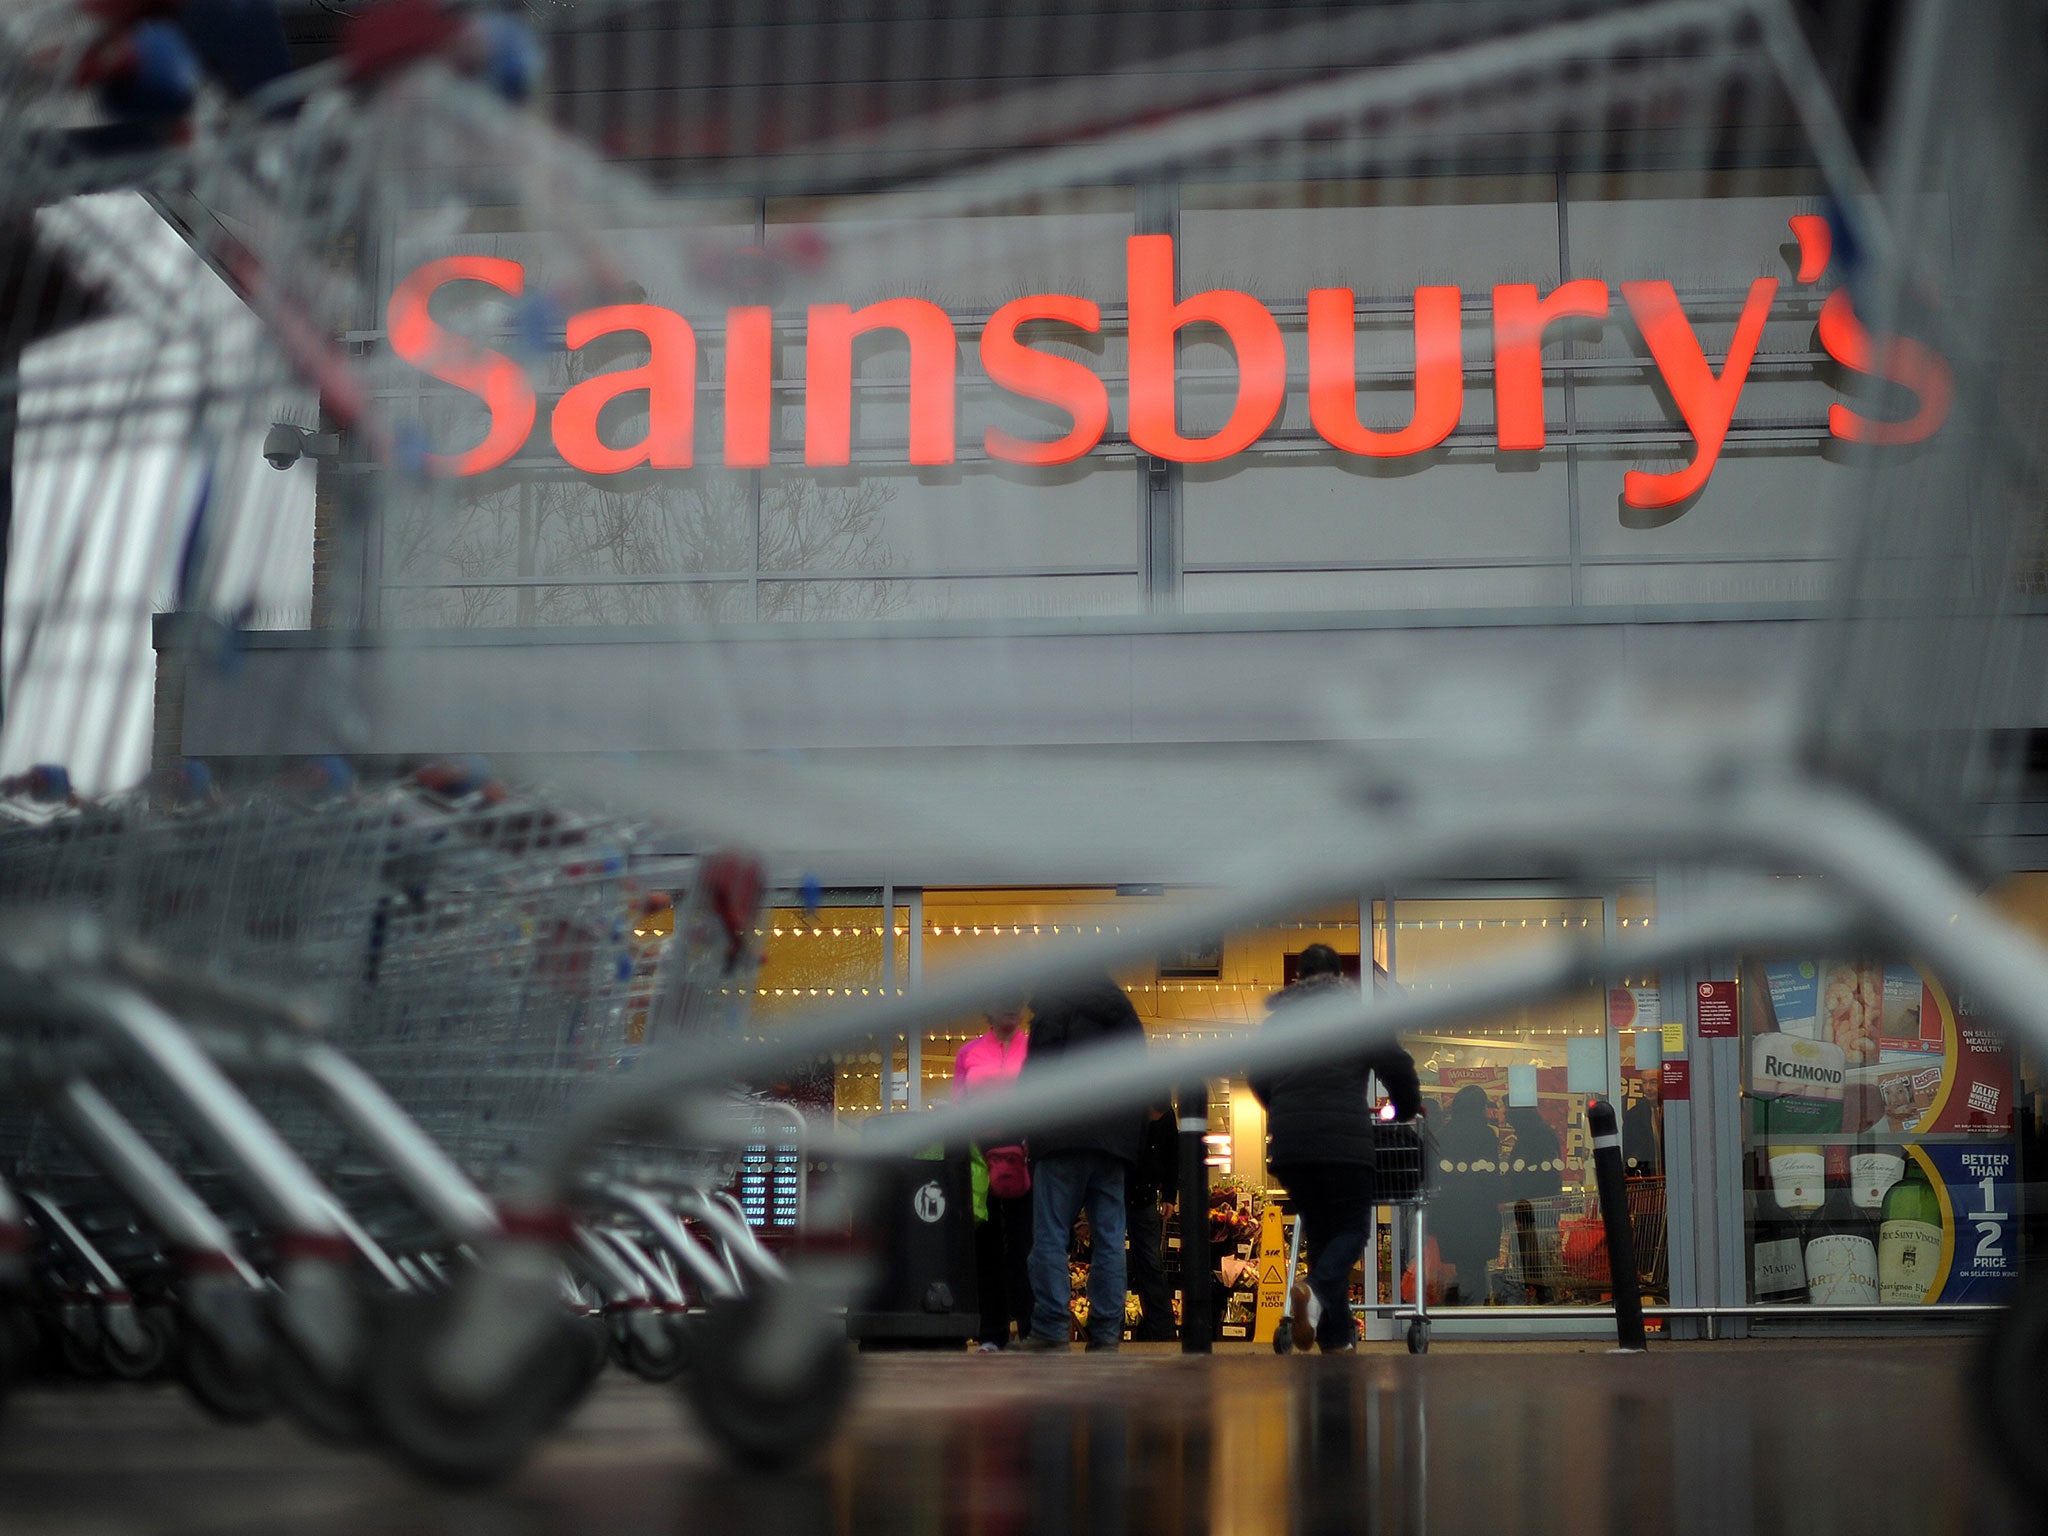 Sainsbury’s says it is prepared to walk away from the HRG deal